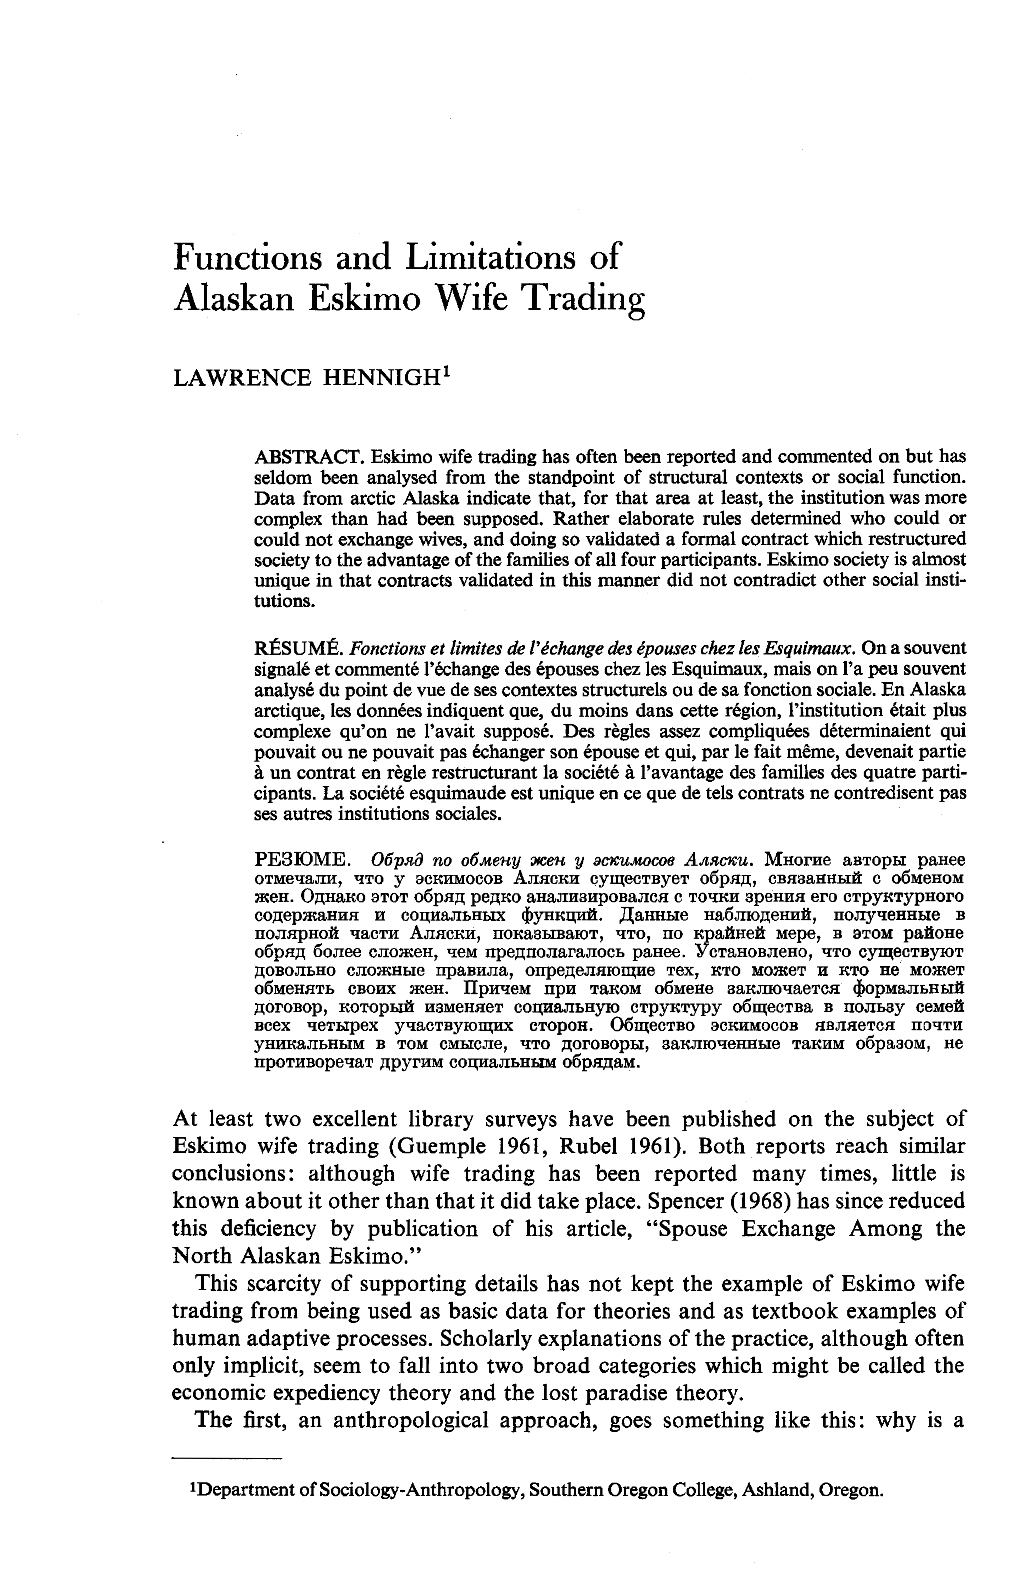 Functions and Limitations of Alaskan Eskimo Wife Trading